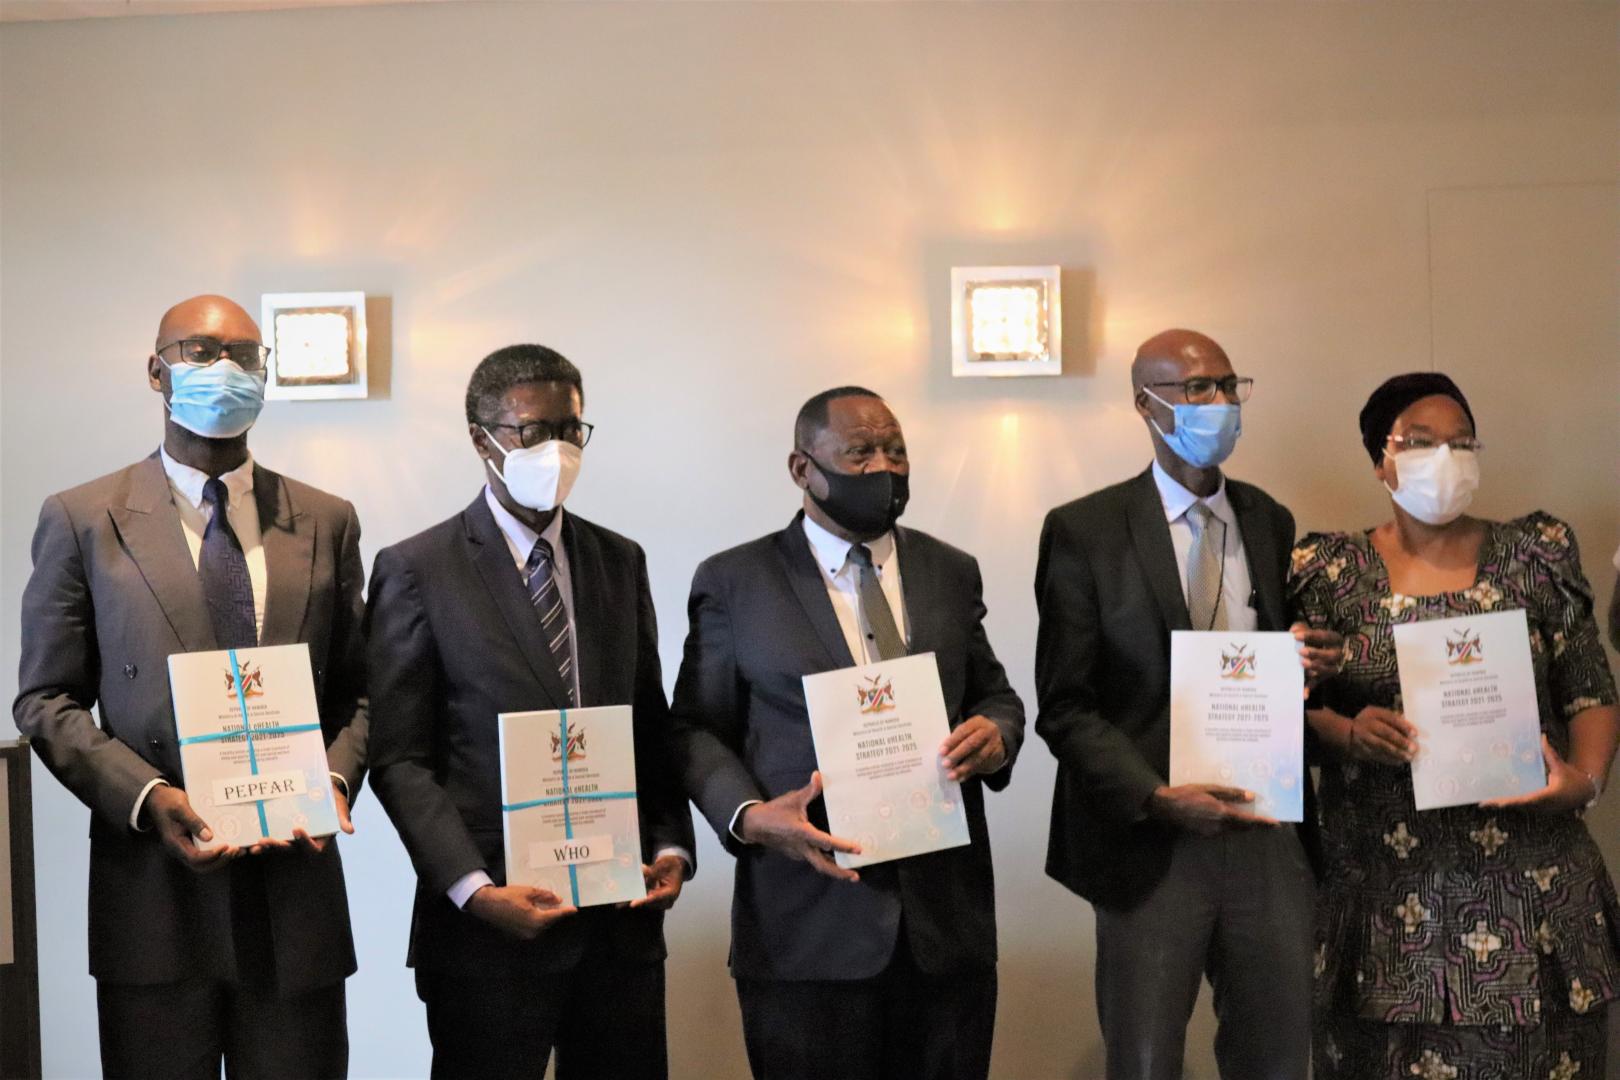 Minister of Health and Social Services, Hon. Dr. Shangula and WHO Representative, Dr. Charles Sagoe-Moses joined by partners at the launch of the National eHealth Strategy. 